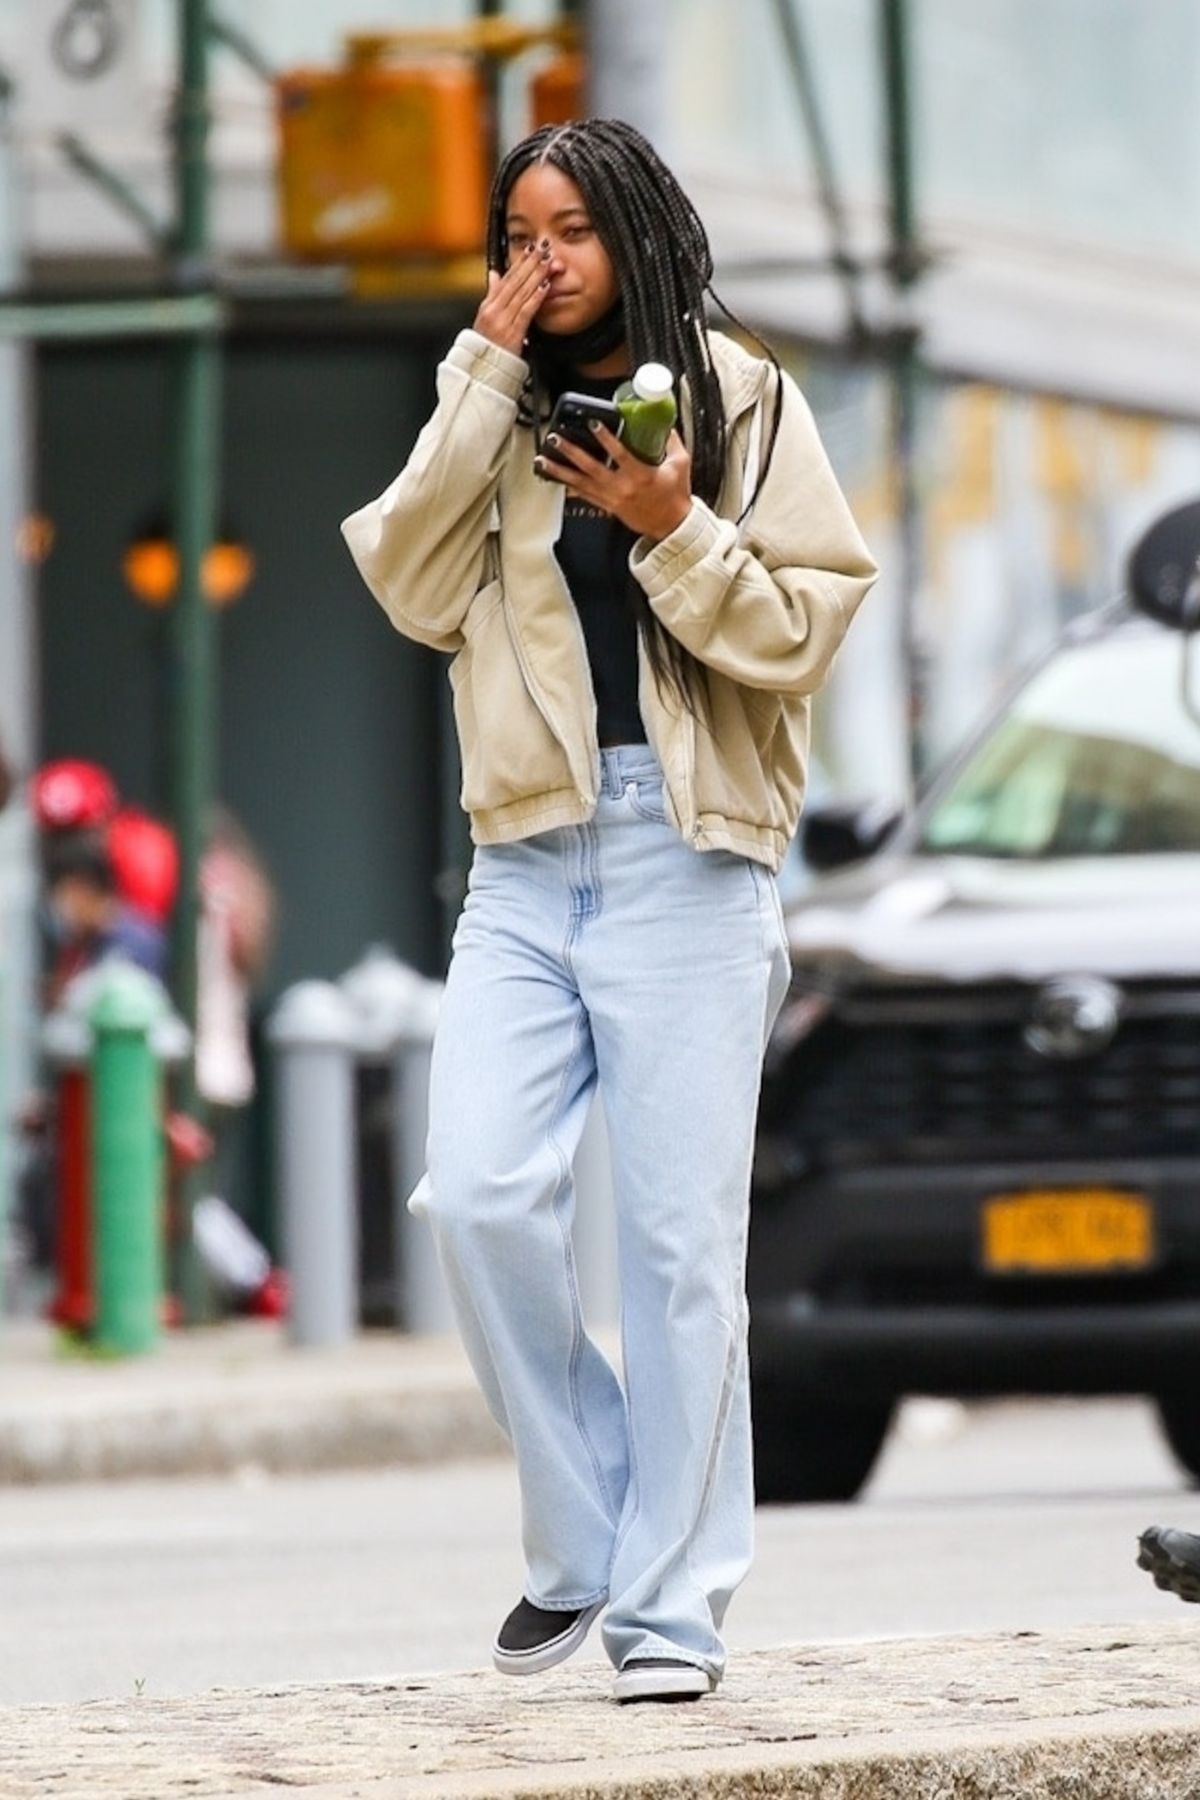 WILLOW SMITH Chatting on Phone in New York 05/24/2021 – HawtCelebs